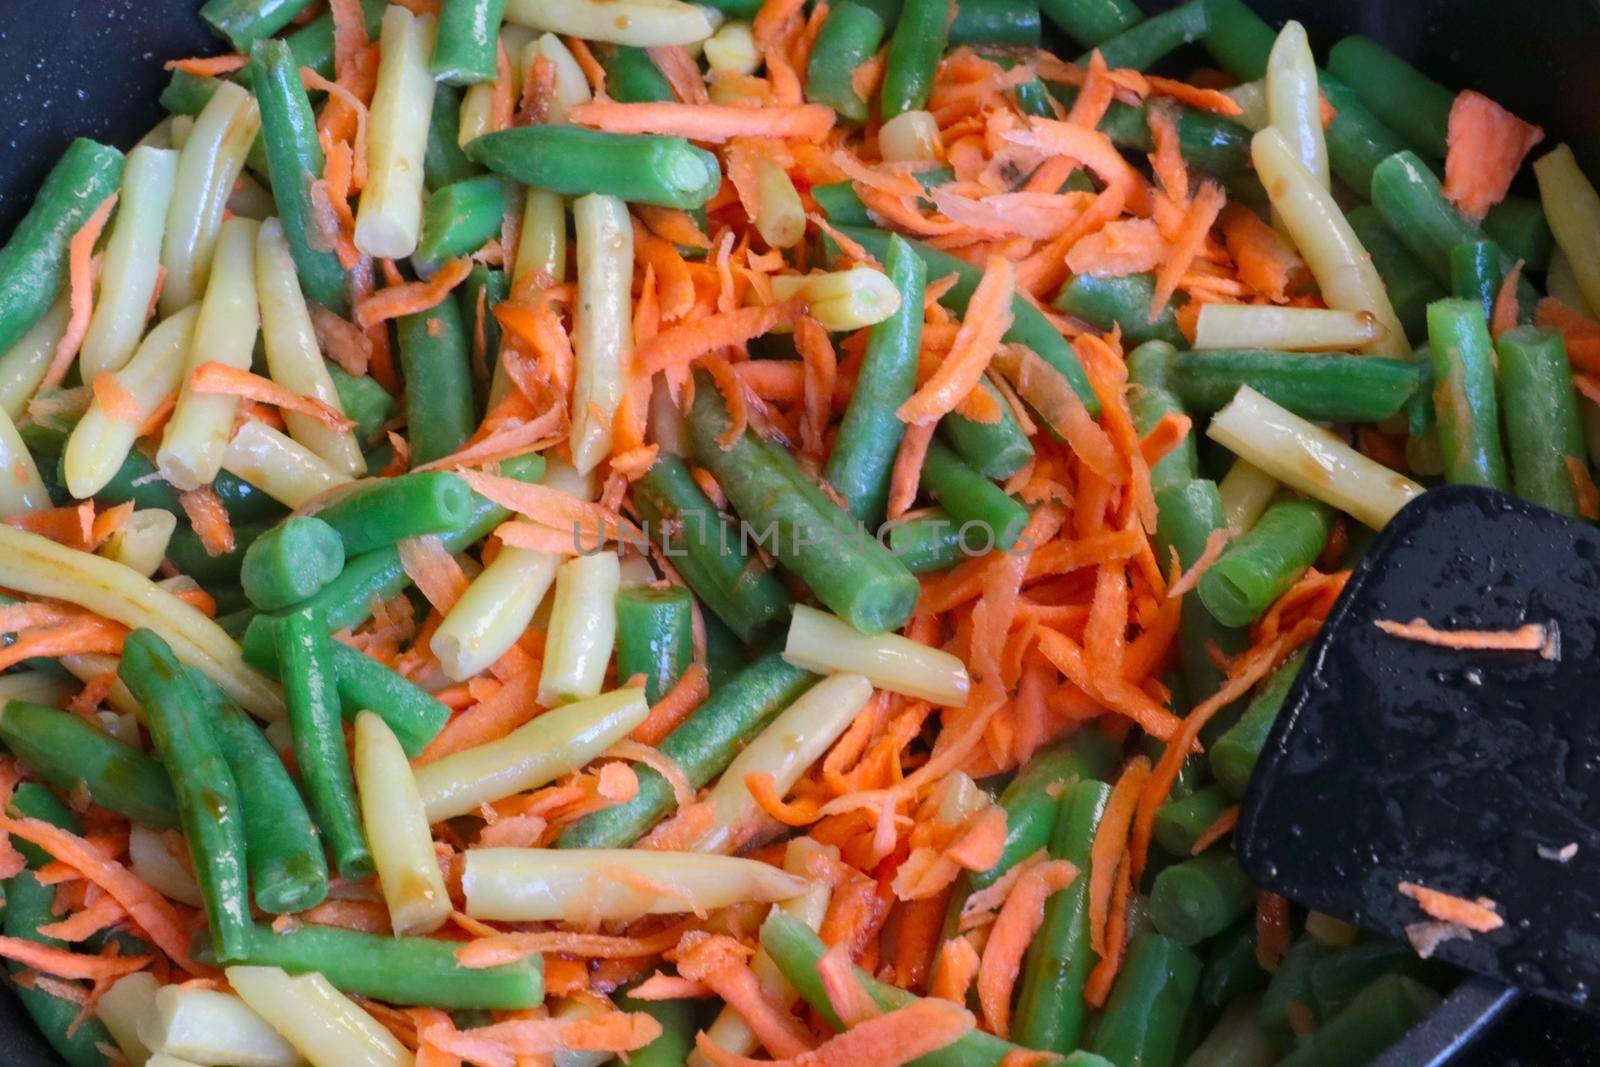 Asparagus beans with carrots are cooked in a pan. by kip02kas